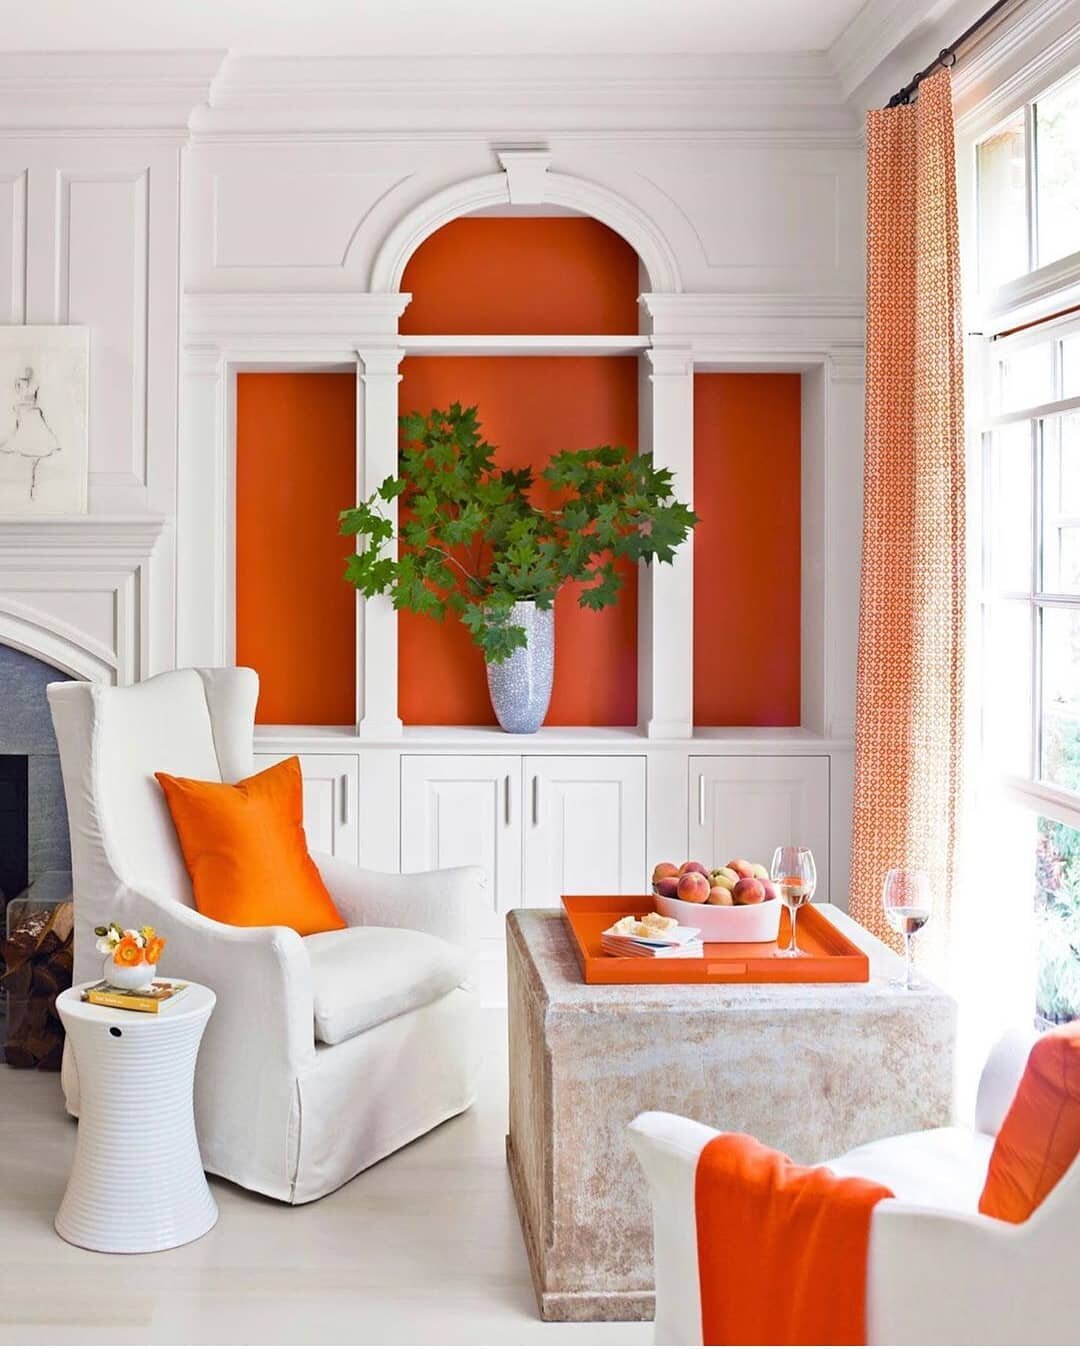 Let's brighten up your Friday with this gorgeous seating area. Loving the vibrant orange, along with the clean, crisp white. Amazing!

@housebeautiful 
Interiors by: @kaydouglassinteriors 
Photo by: @ericpiasecki 
#denverdesigner #denverinteriordesig